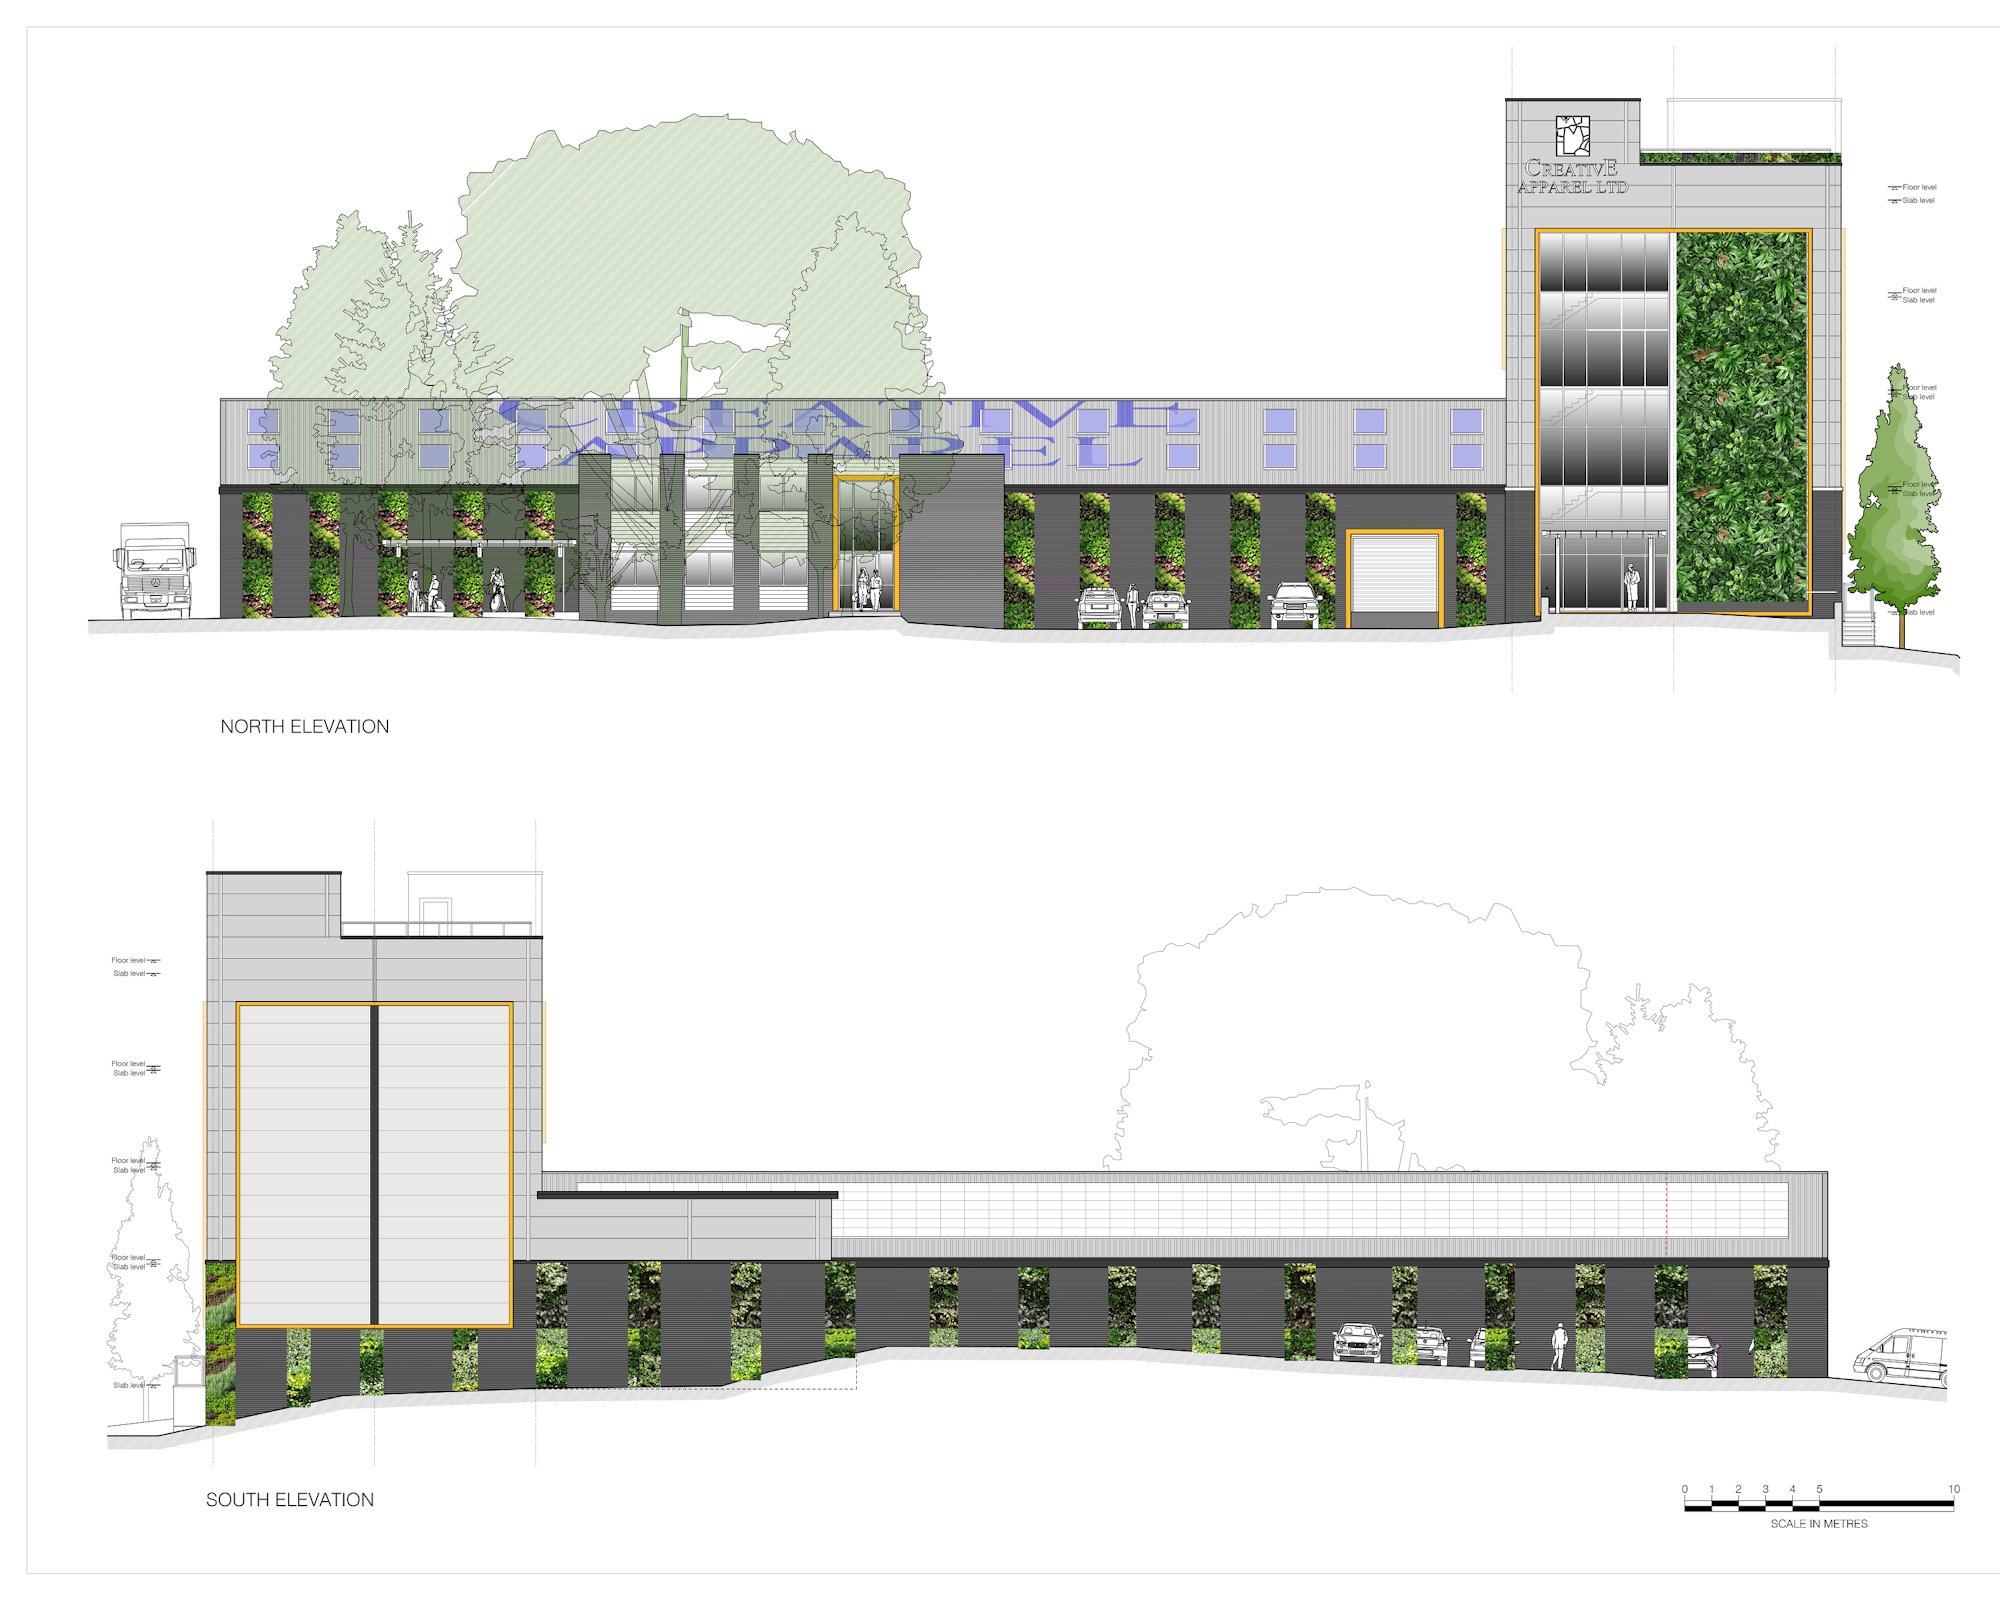 Side view drawing of plans for a large commercial building with green infrastructure including green walls and trees for biodiversity